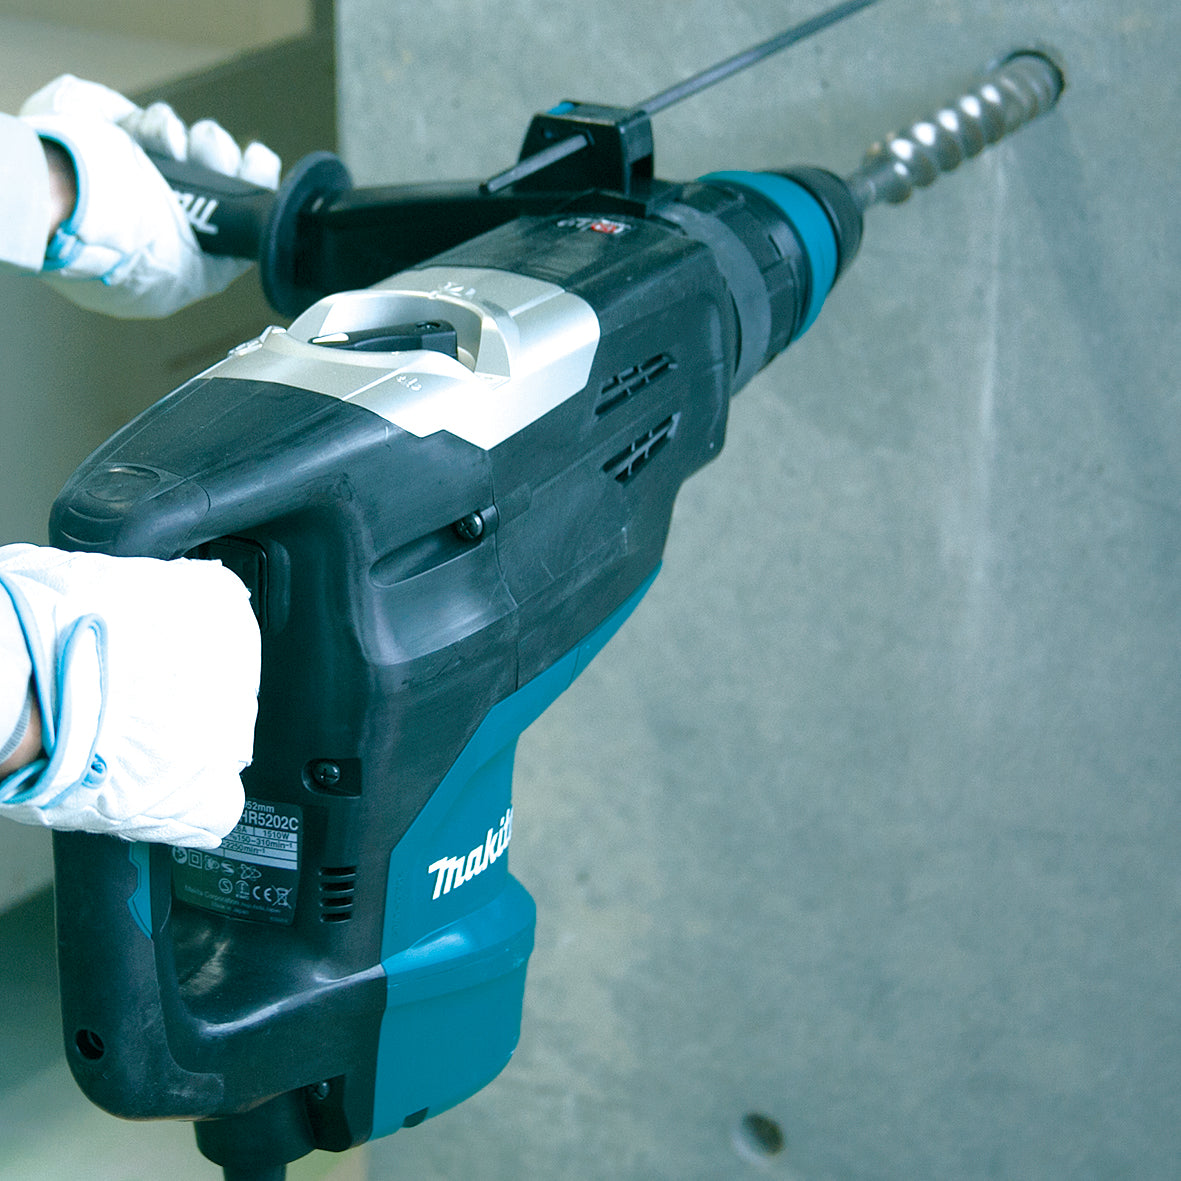 1510W 52mm SDS-Max Rotary Hammer HR5202C by Makita